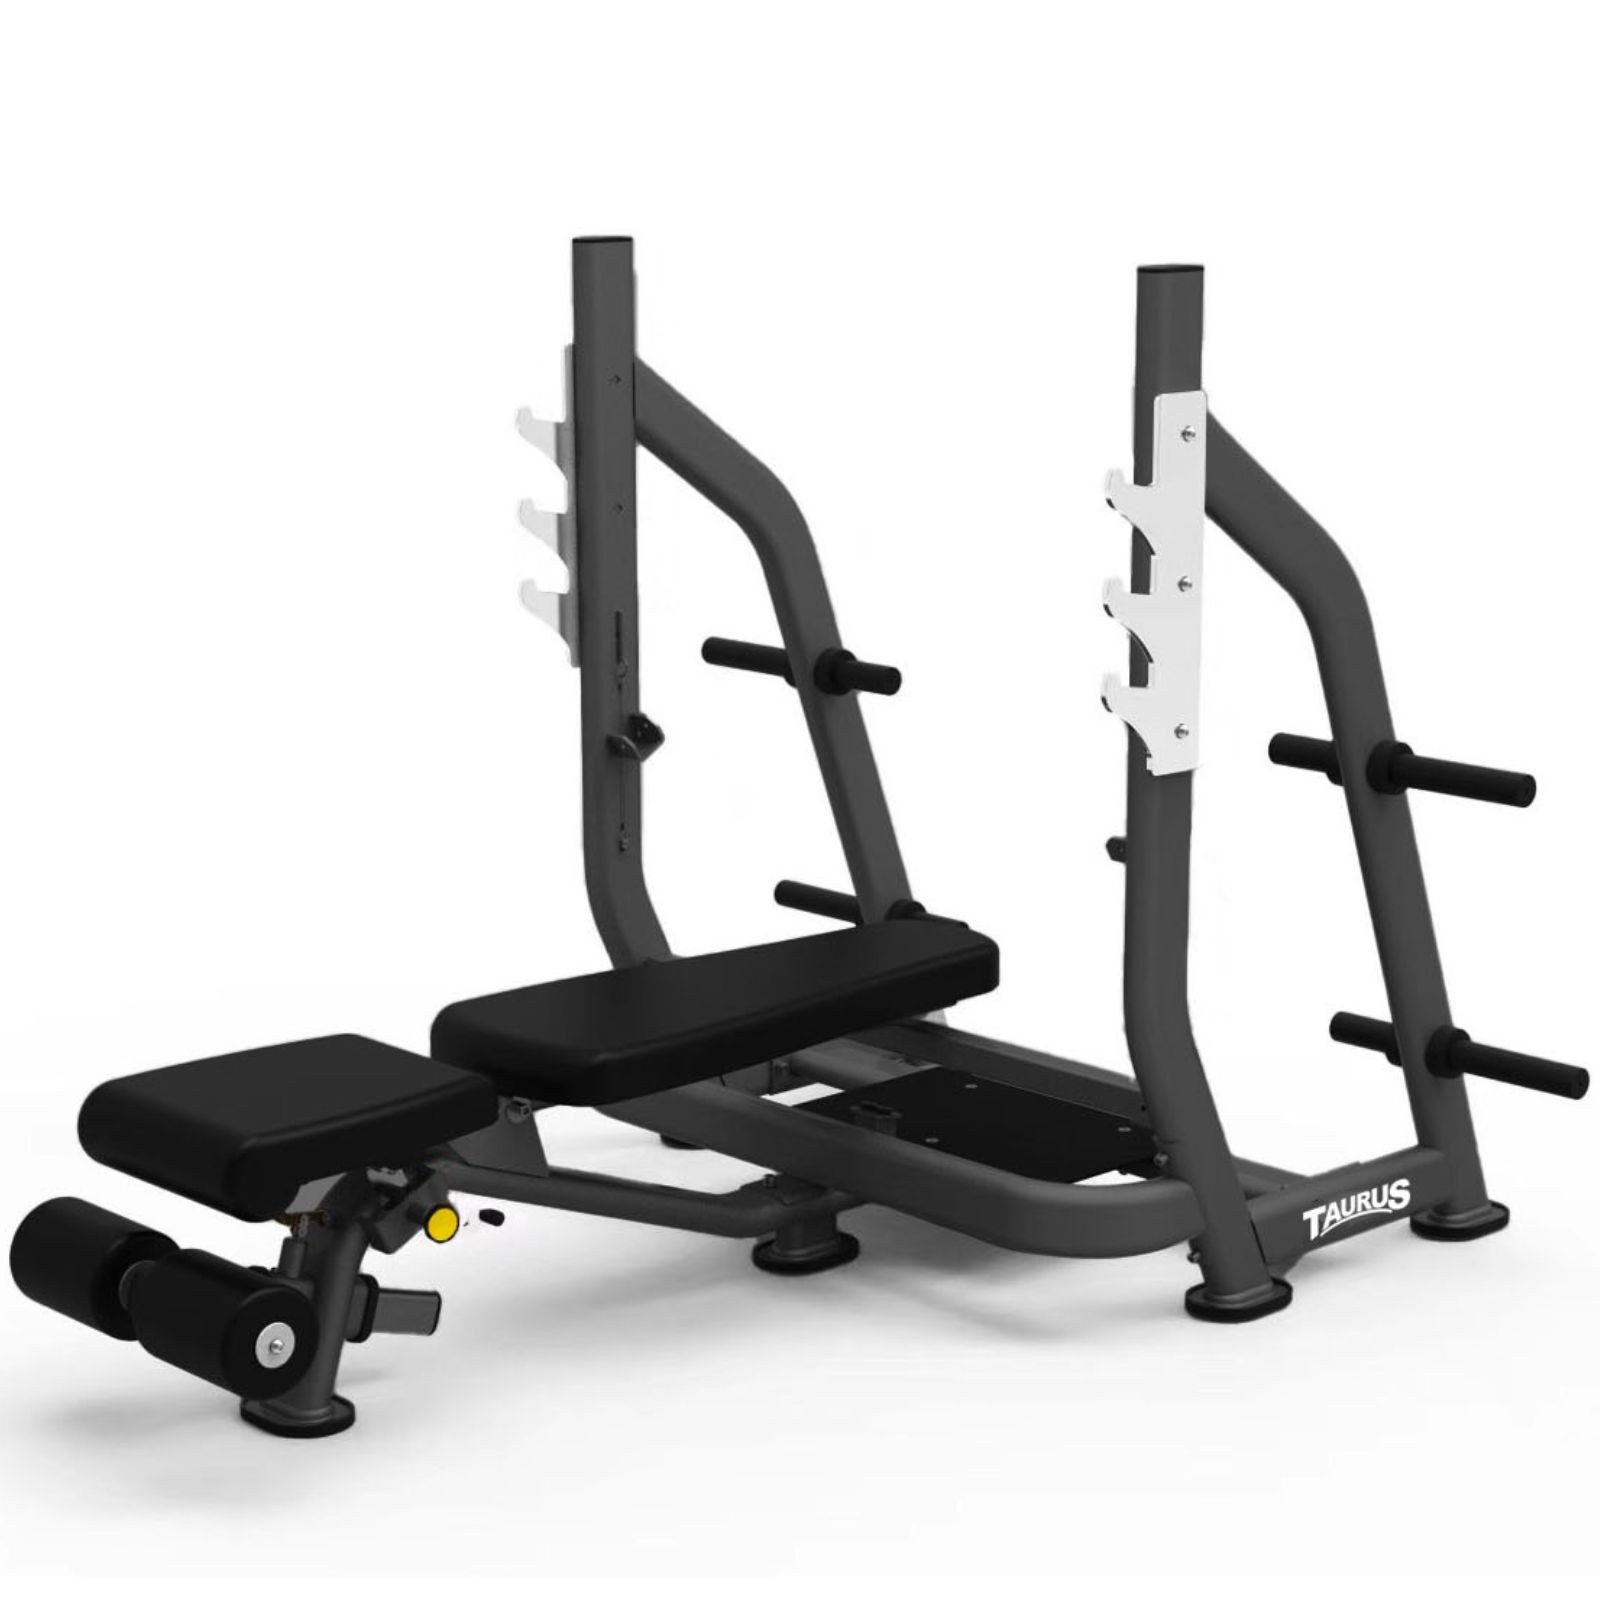 Taurus Elite Olympic Adjustable FID Bench – High-Quality Equipment for Commercial Gyms